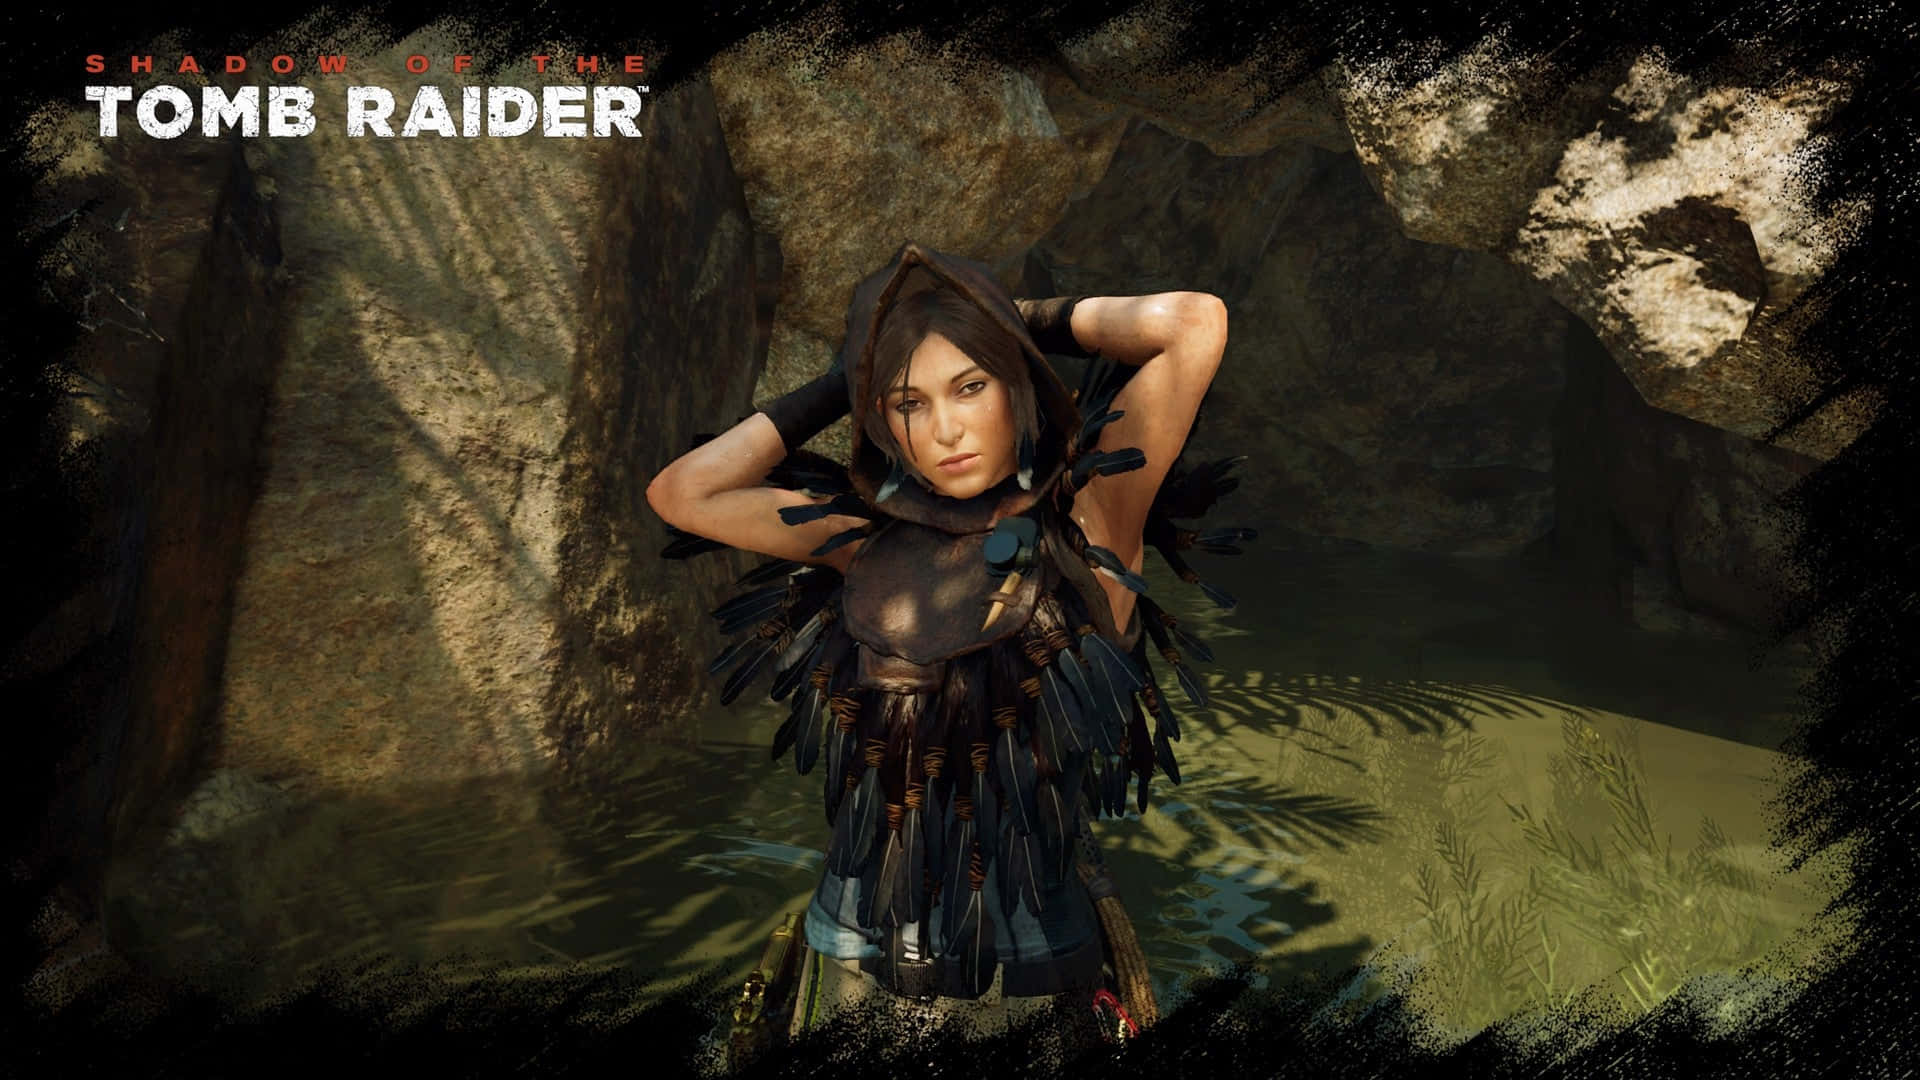 Lara Croft looking stealthy in Shadow Of The Tomb Raider